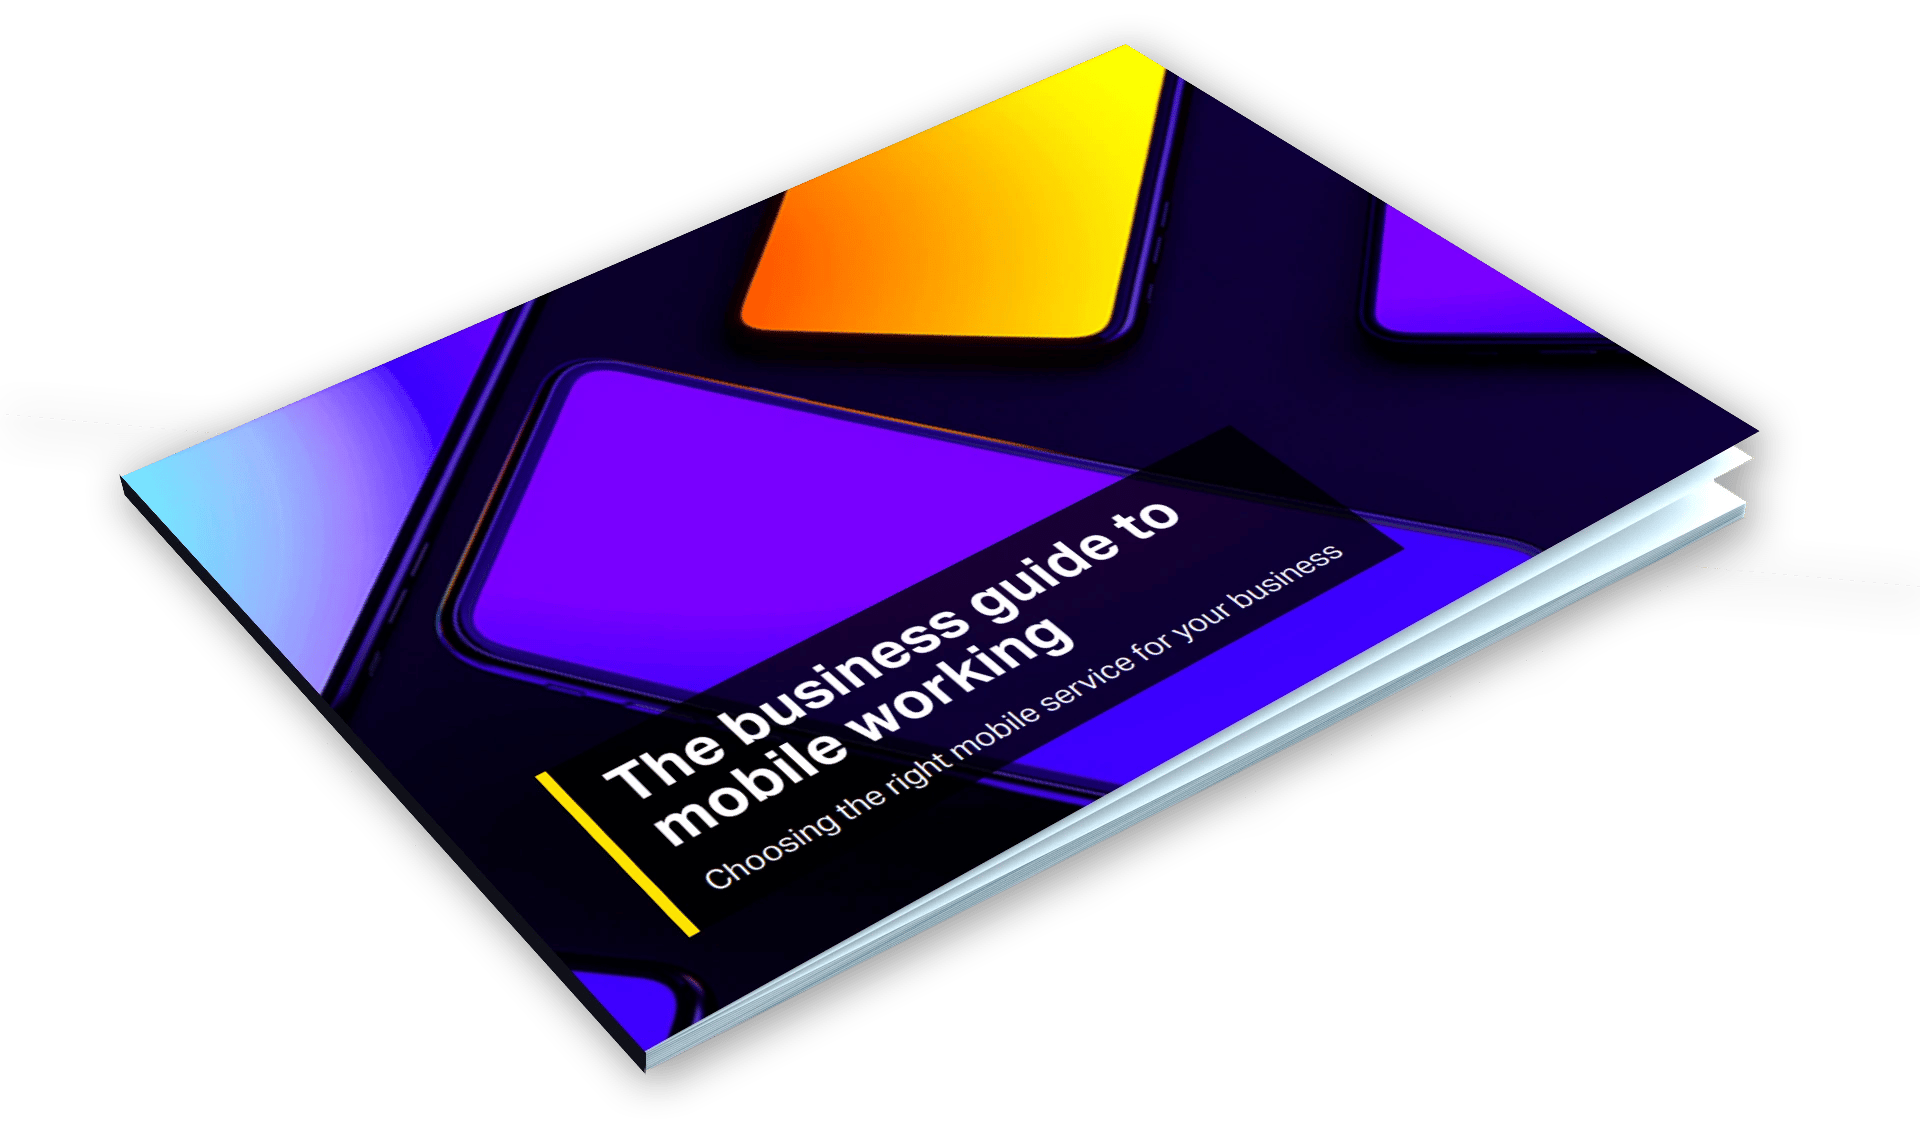 TMB Business Guide Mock-up